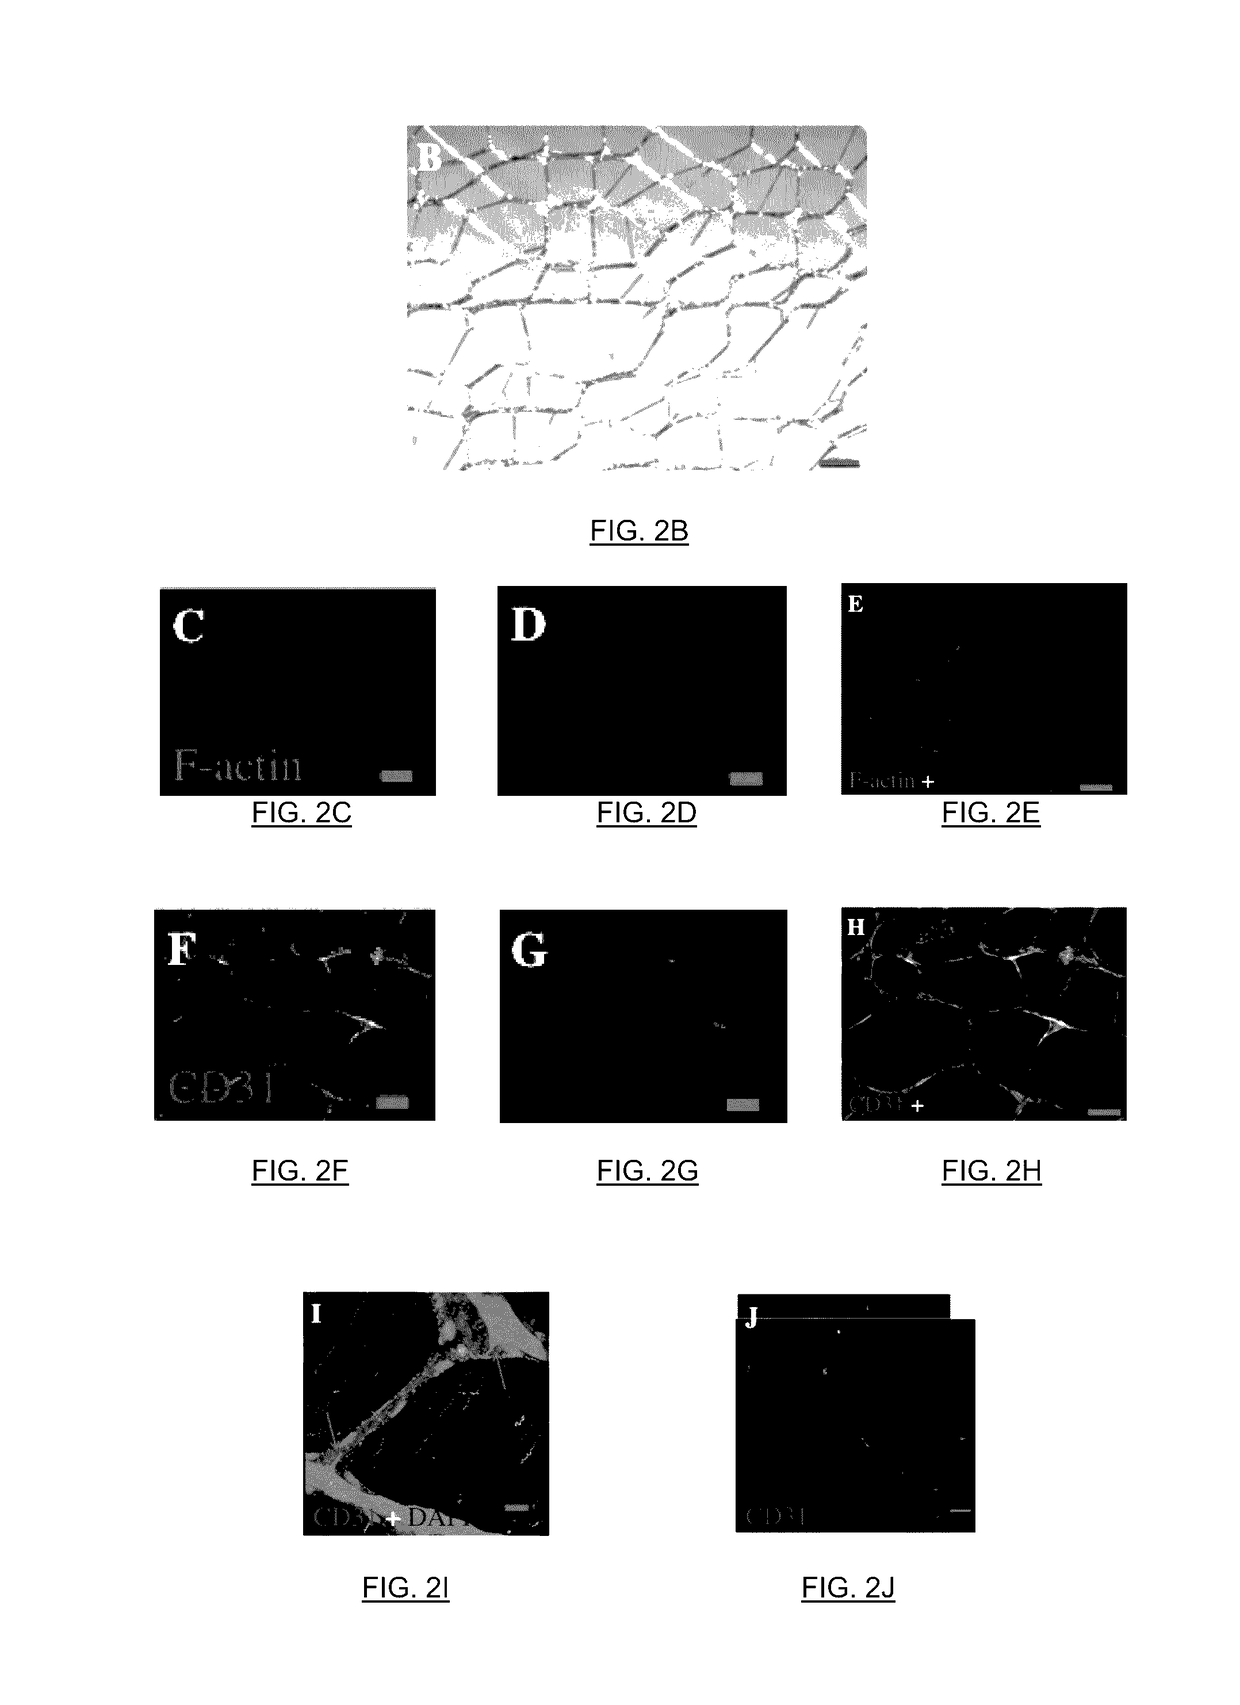 Controllable formation of microvascular networks using sacrificial microfiber templates